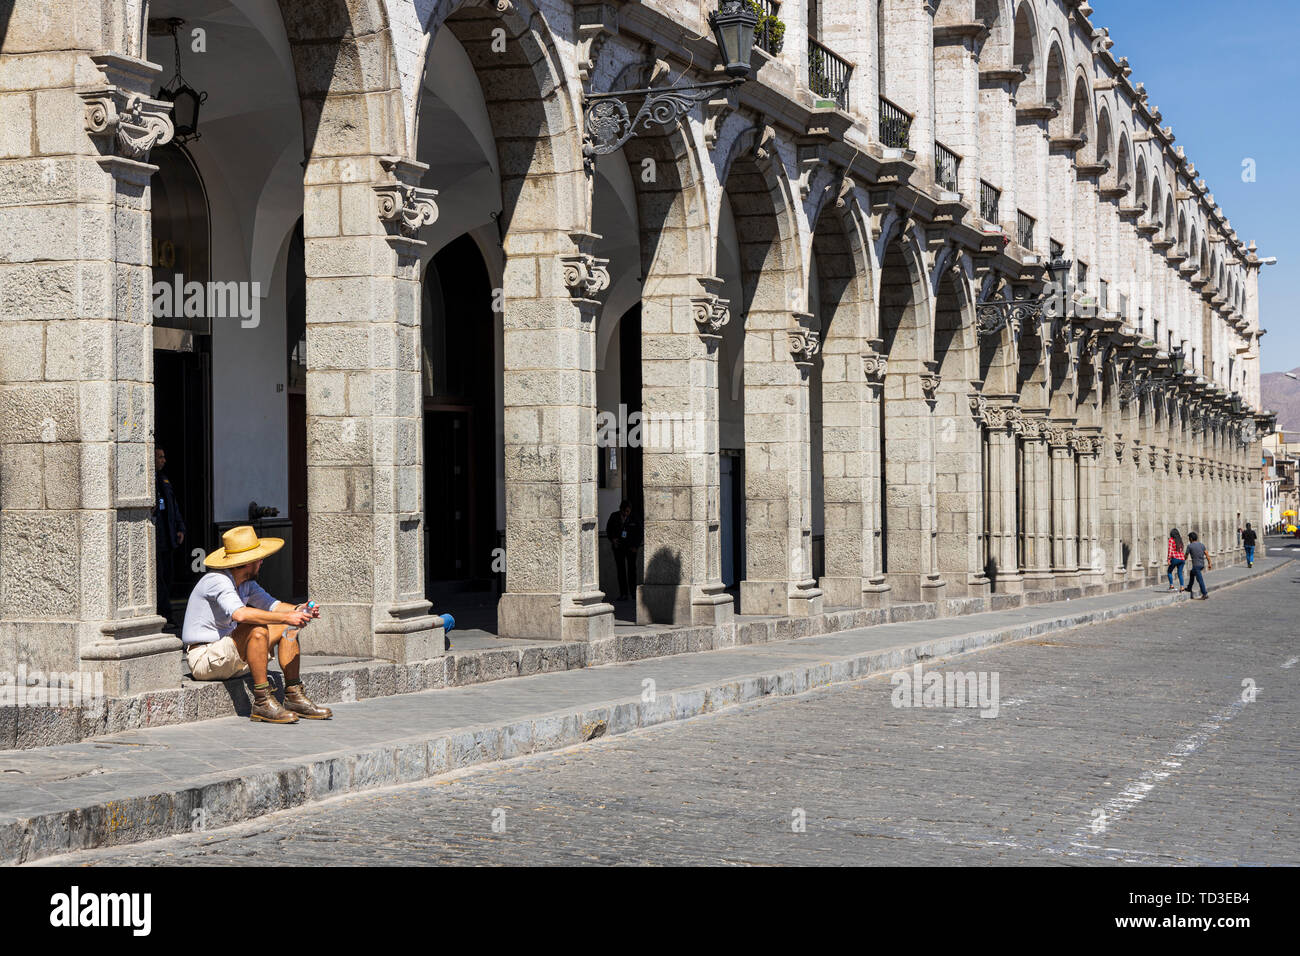 Row of colonial style arches in the Plaza de Armas, main square in Arequipa, Peru, South America Stock Photo